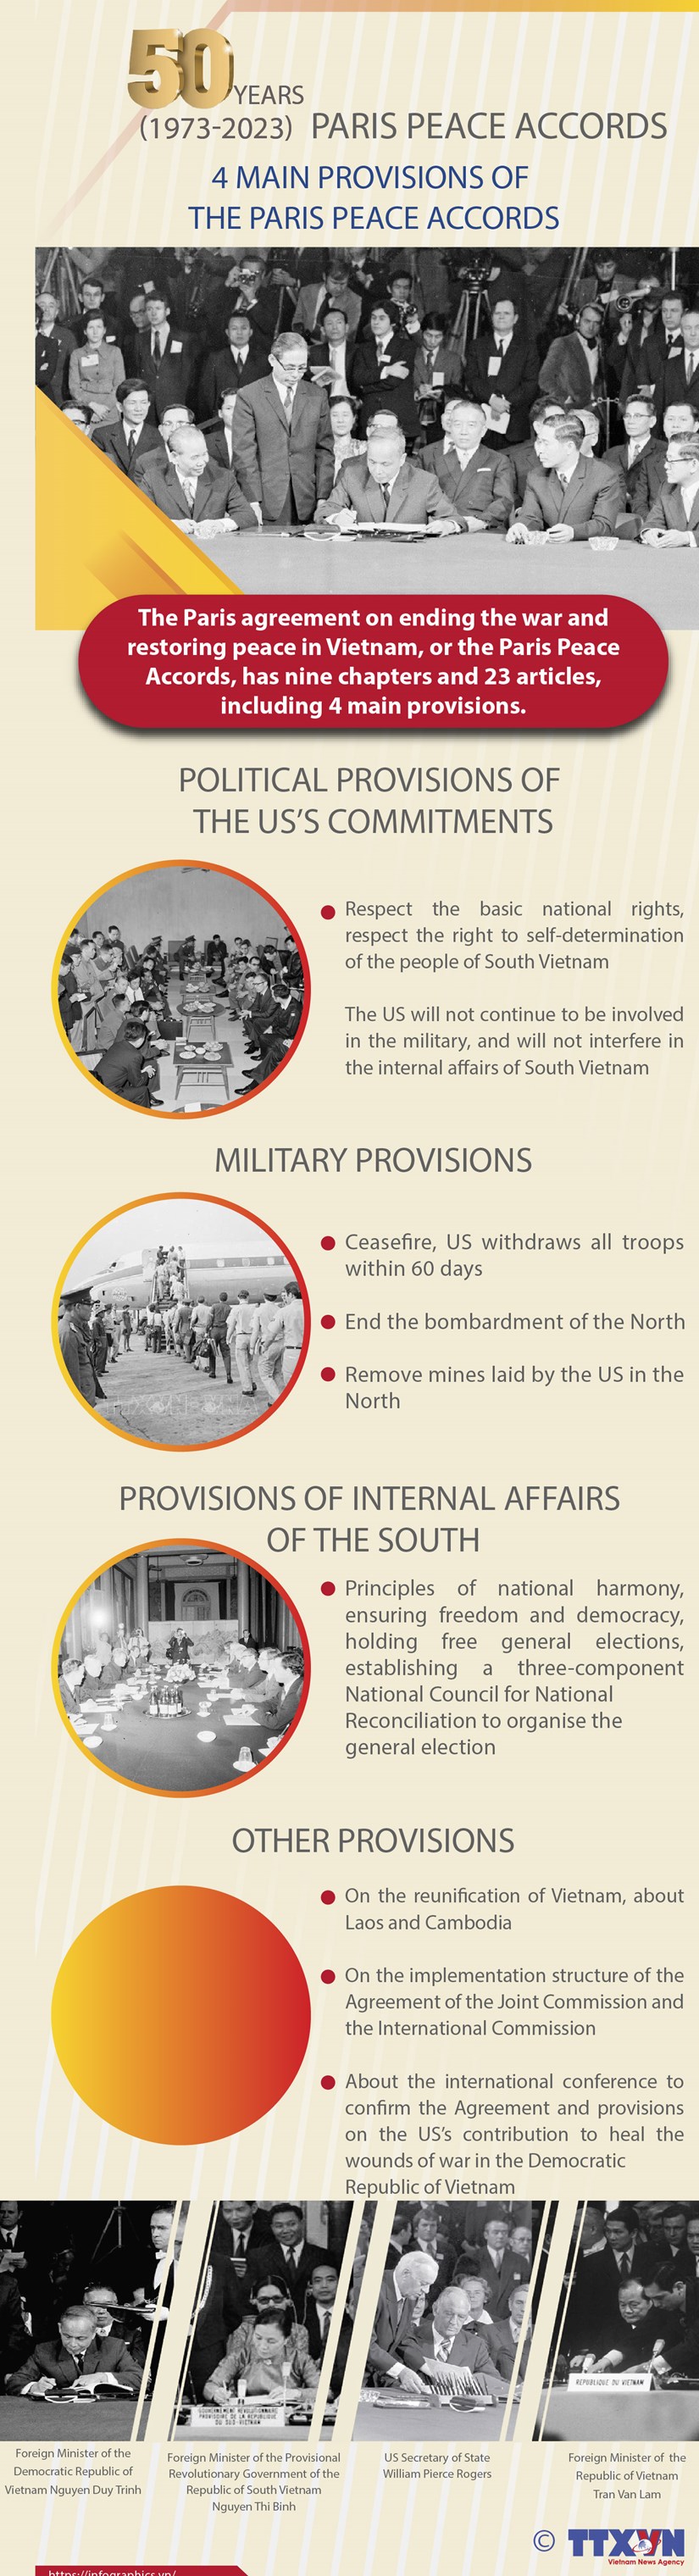 Four main provisions of the Paris Peace Accords hinh anh 1